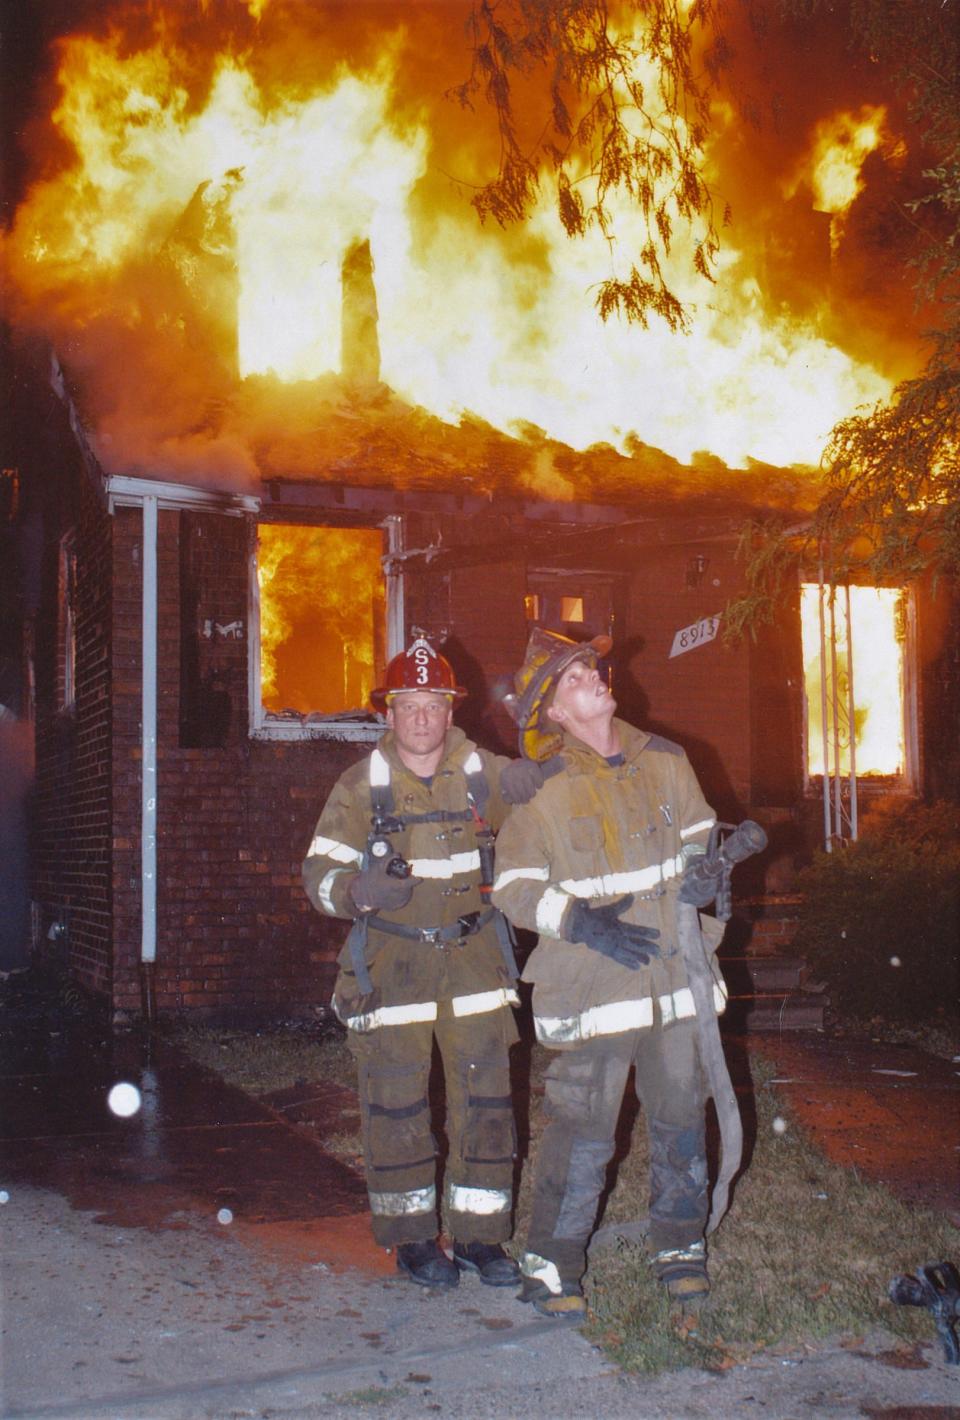 From left, Detroit firefighter Mike Nevin, at the time ranked sergeant, lays his hand on the shoulder of an unidentified young firefighter to calm a rookie while the two waited to receive water for dousing a serious house fire in Detroit in 2010-2015.